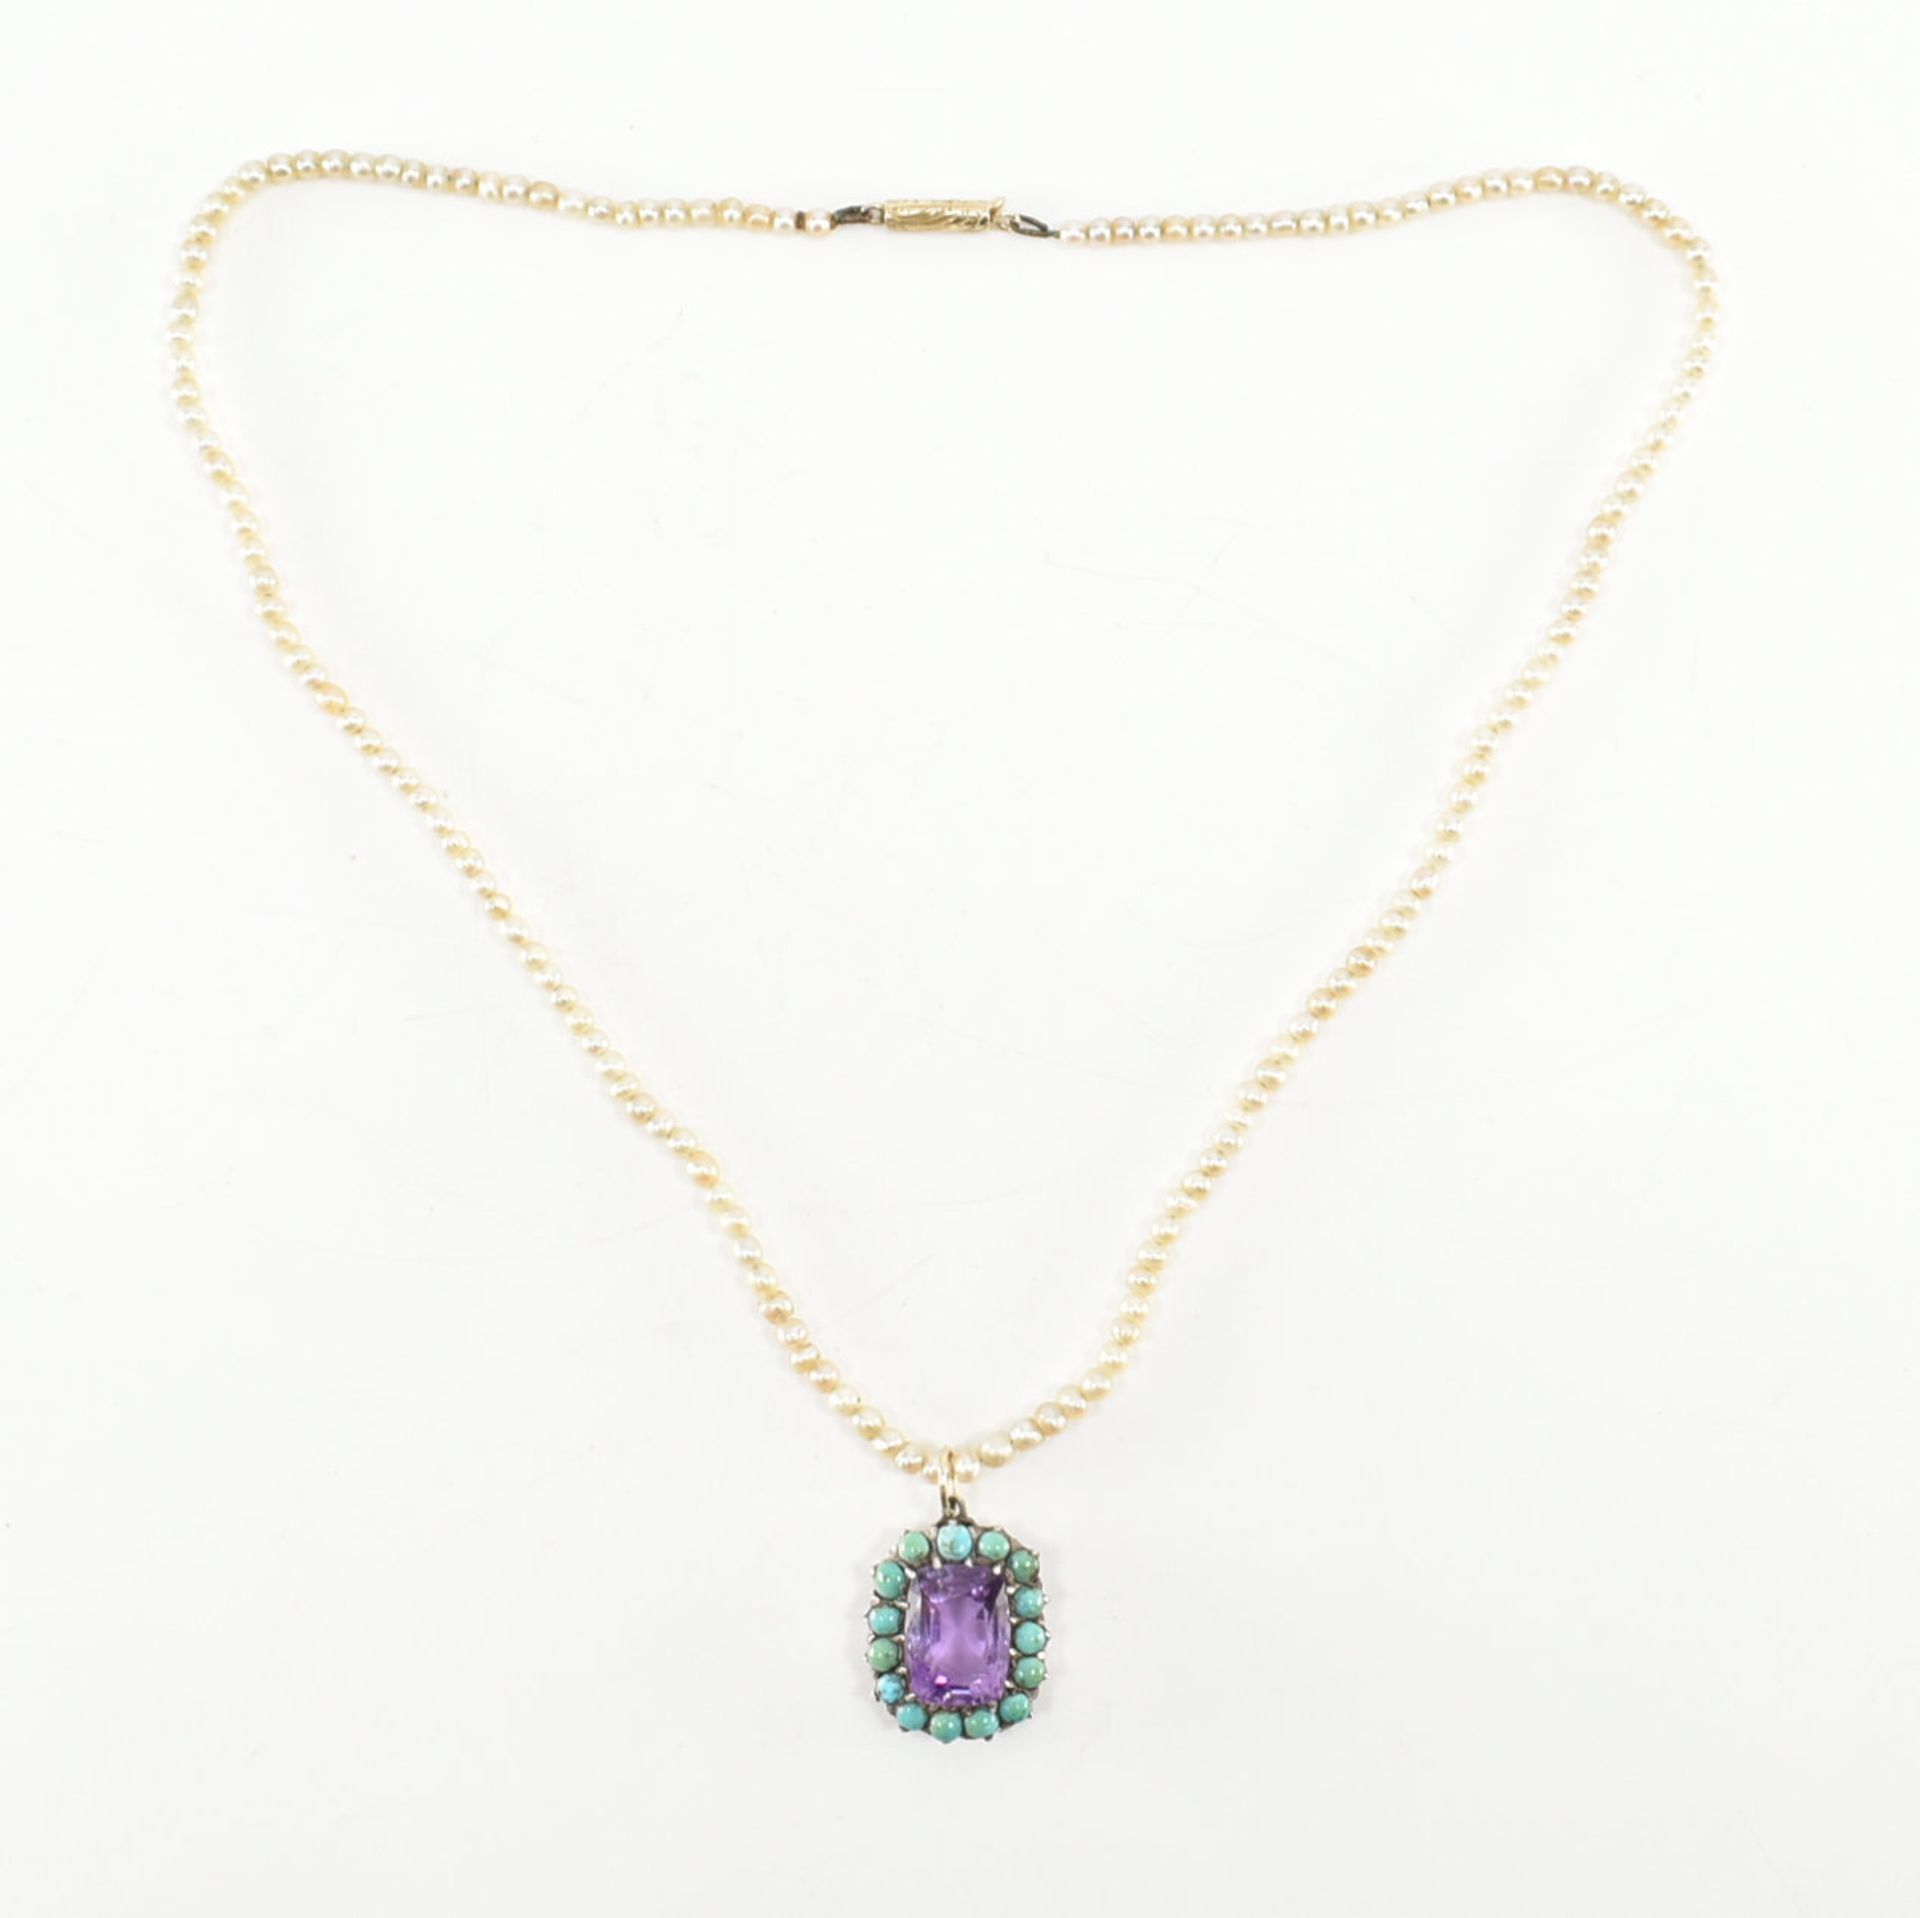 VICTORIAN PEARL AMETHYST TURQUOISE PENDANT NECKLACE - Image 2 of 6